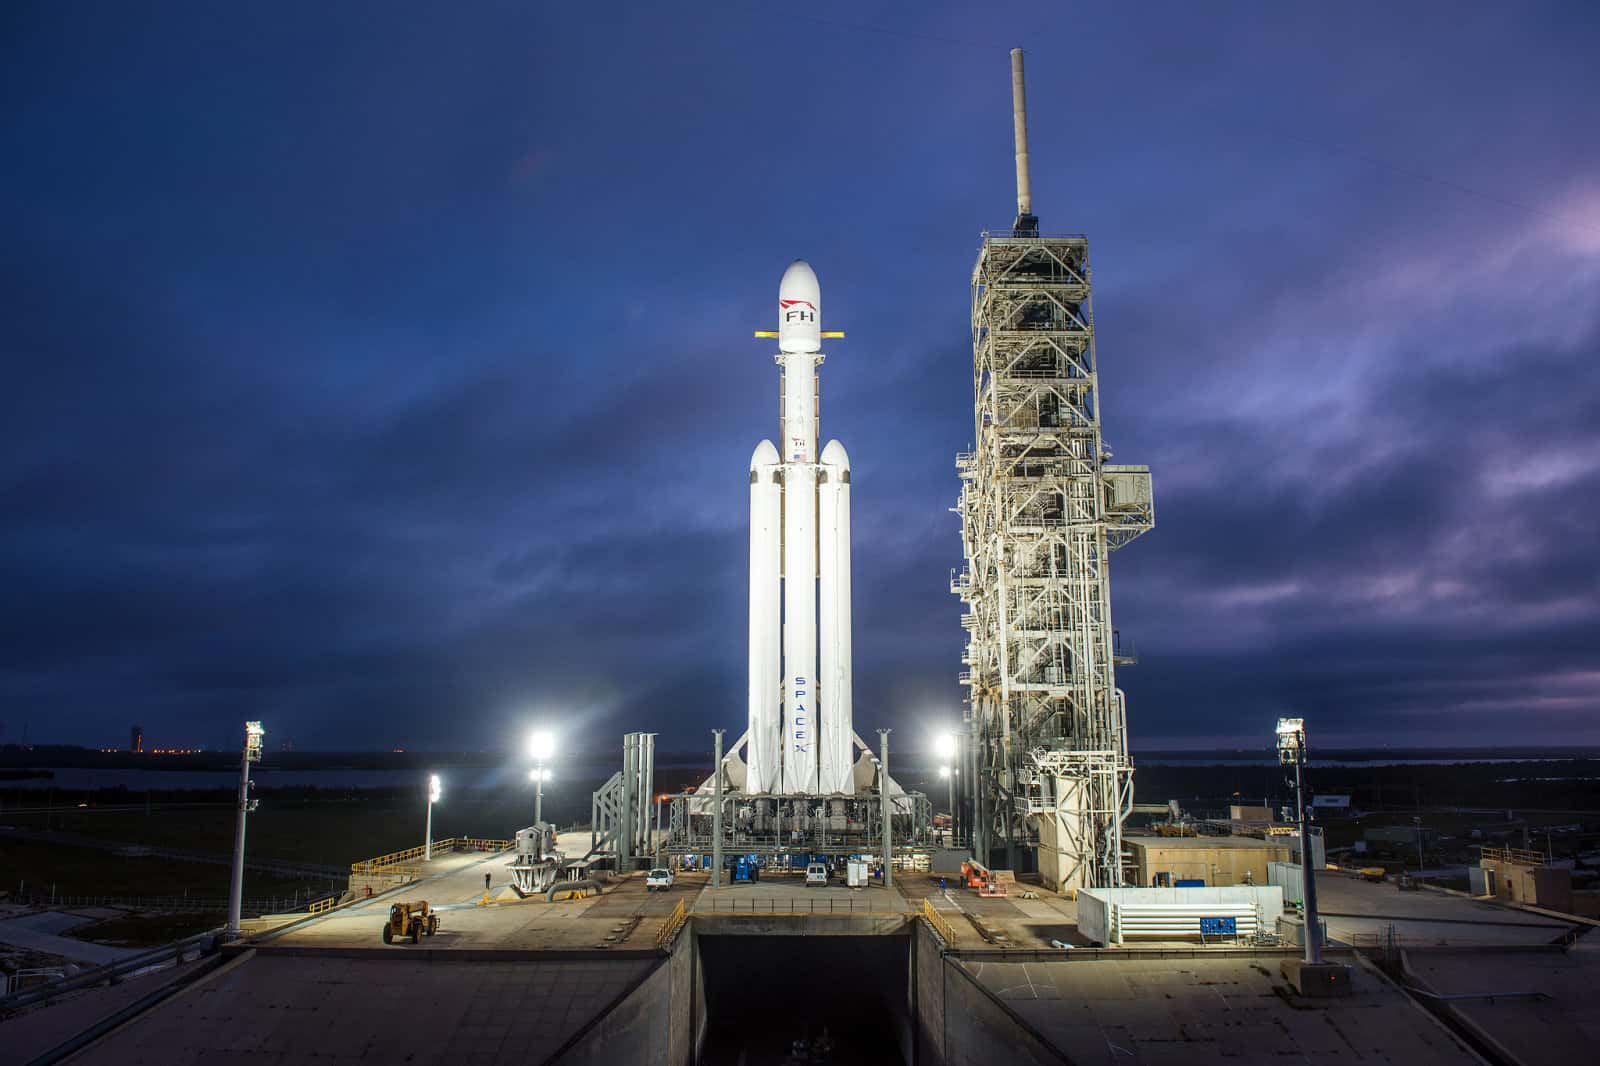 <p>The Falcon 1 has, of course, one engine. The Falcon 9, then, clearly has nine engines. And the Falcon Heavy? The Falcon Heavy has 27 engines. They come in three sets of nine and the craft weighs 64 metric tons.</p>